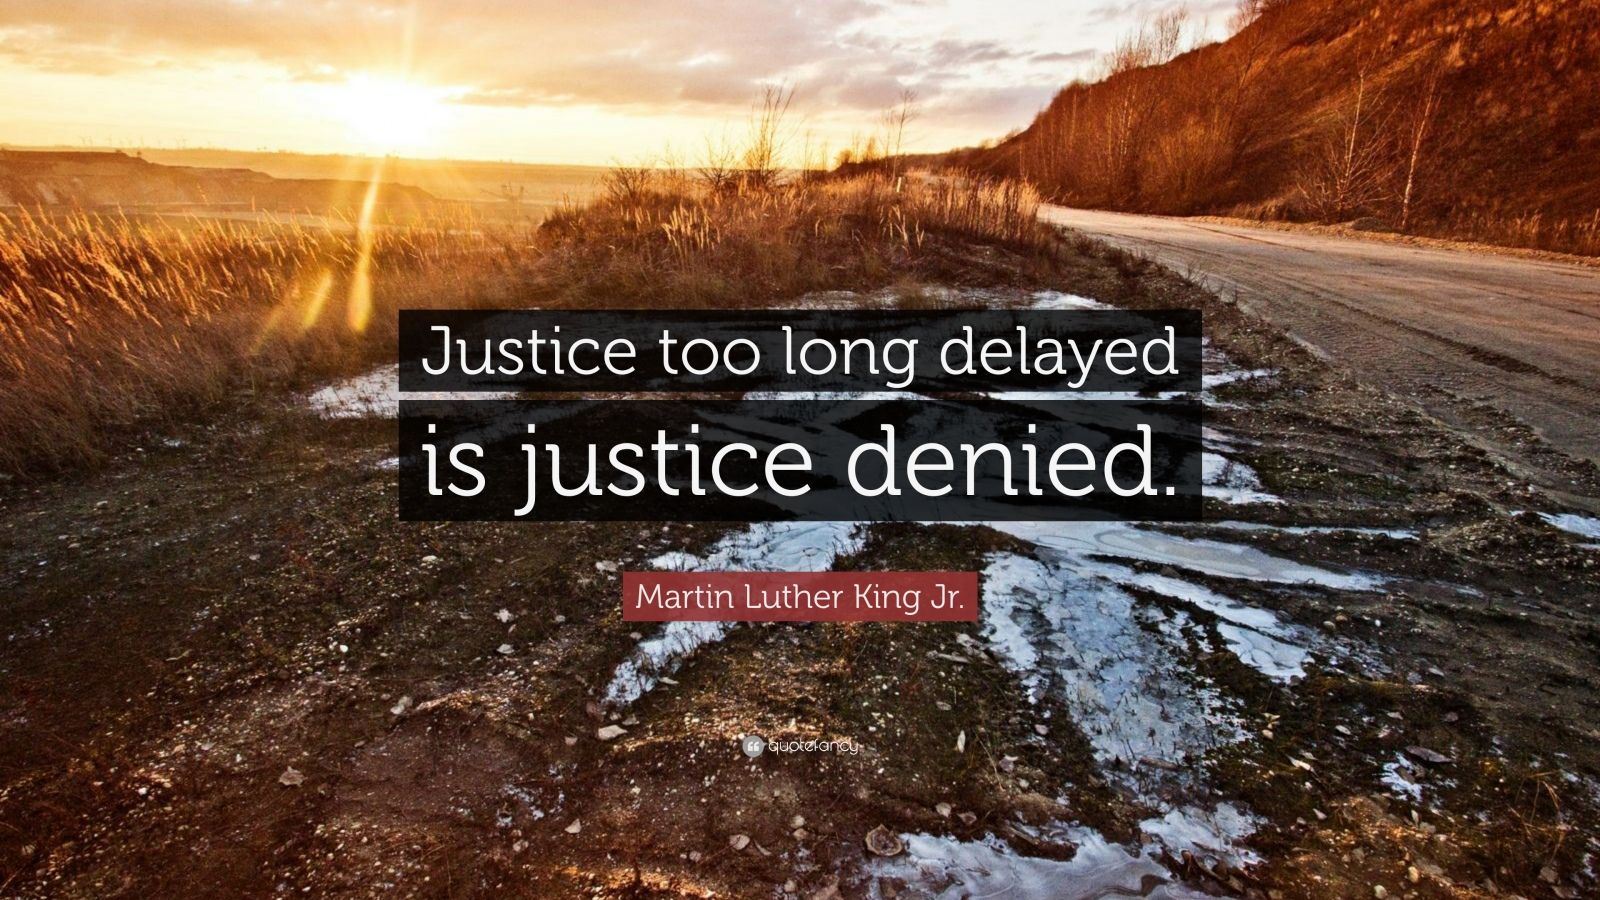 short essay on justice delayed is justice denied